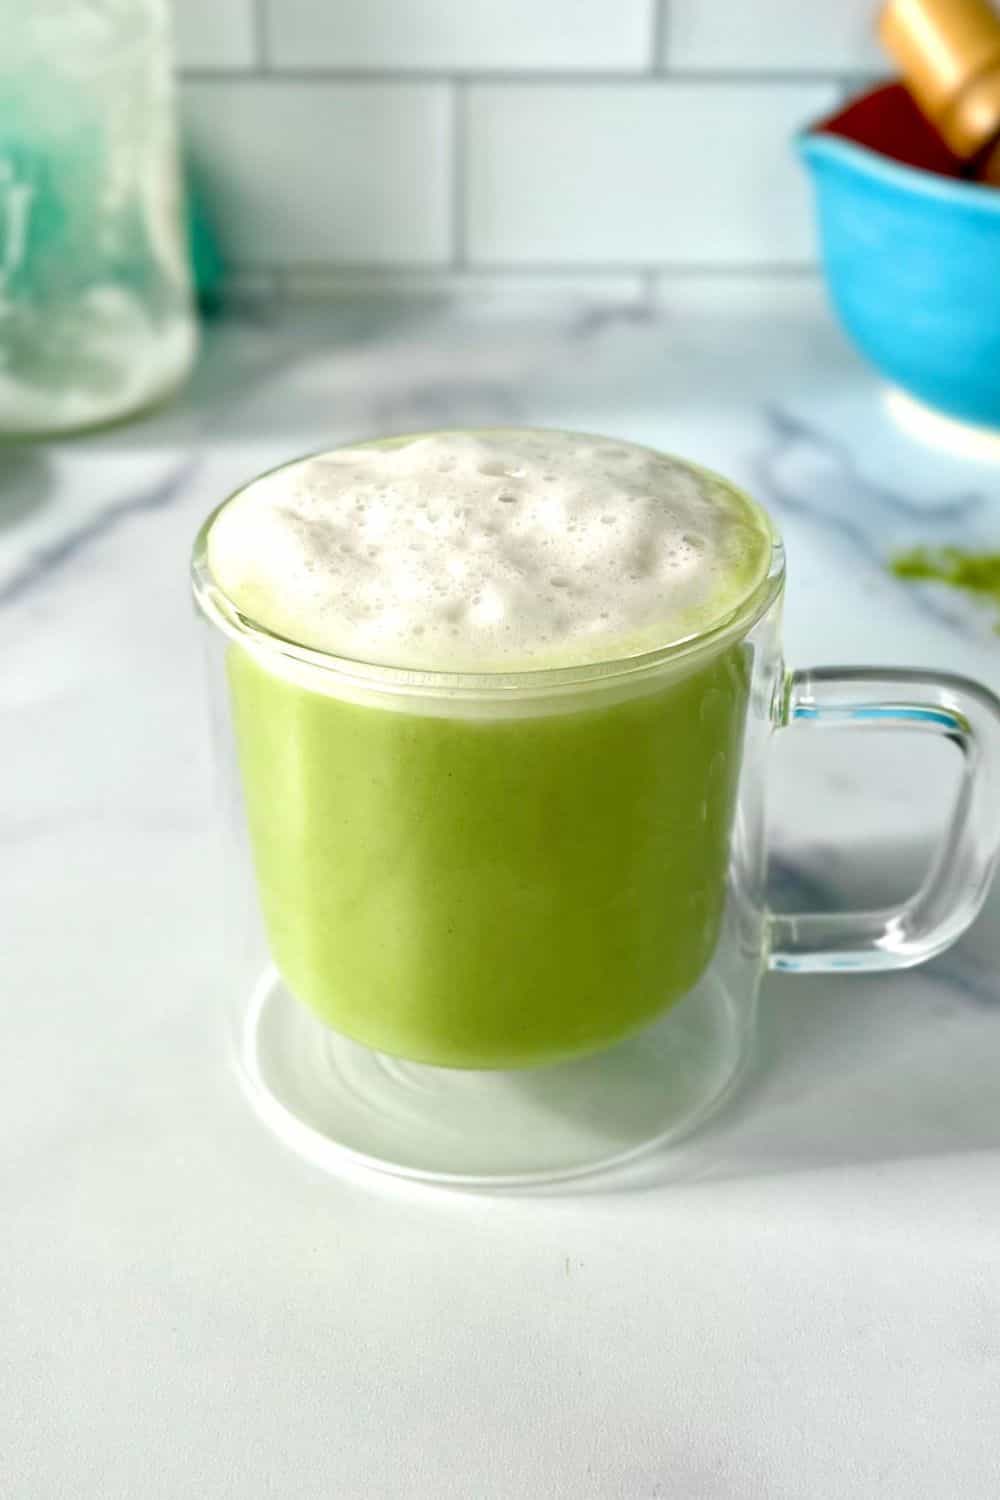 A matcha latte with almond milk in a glass mug.